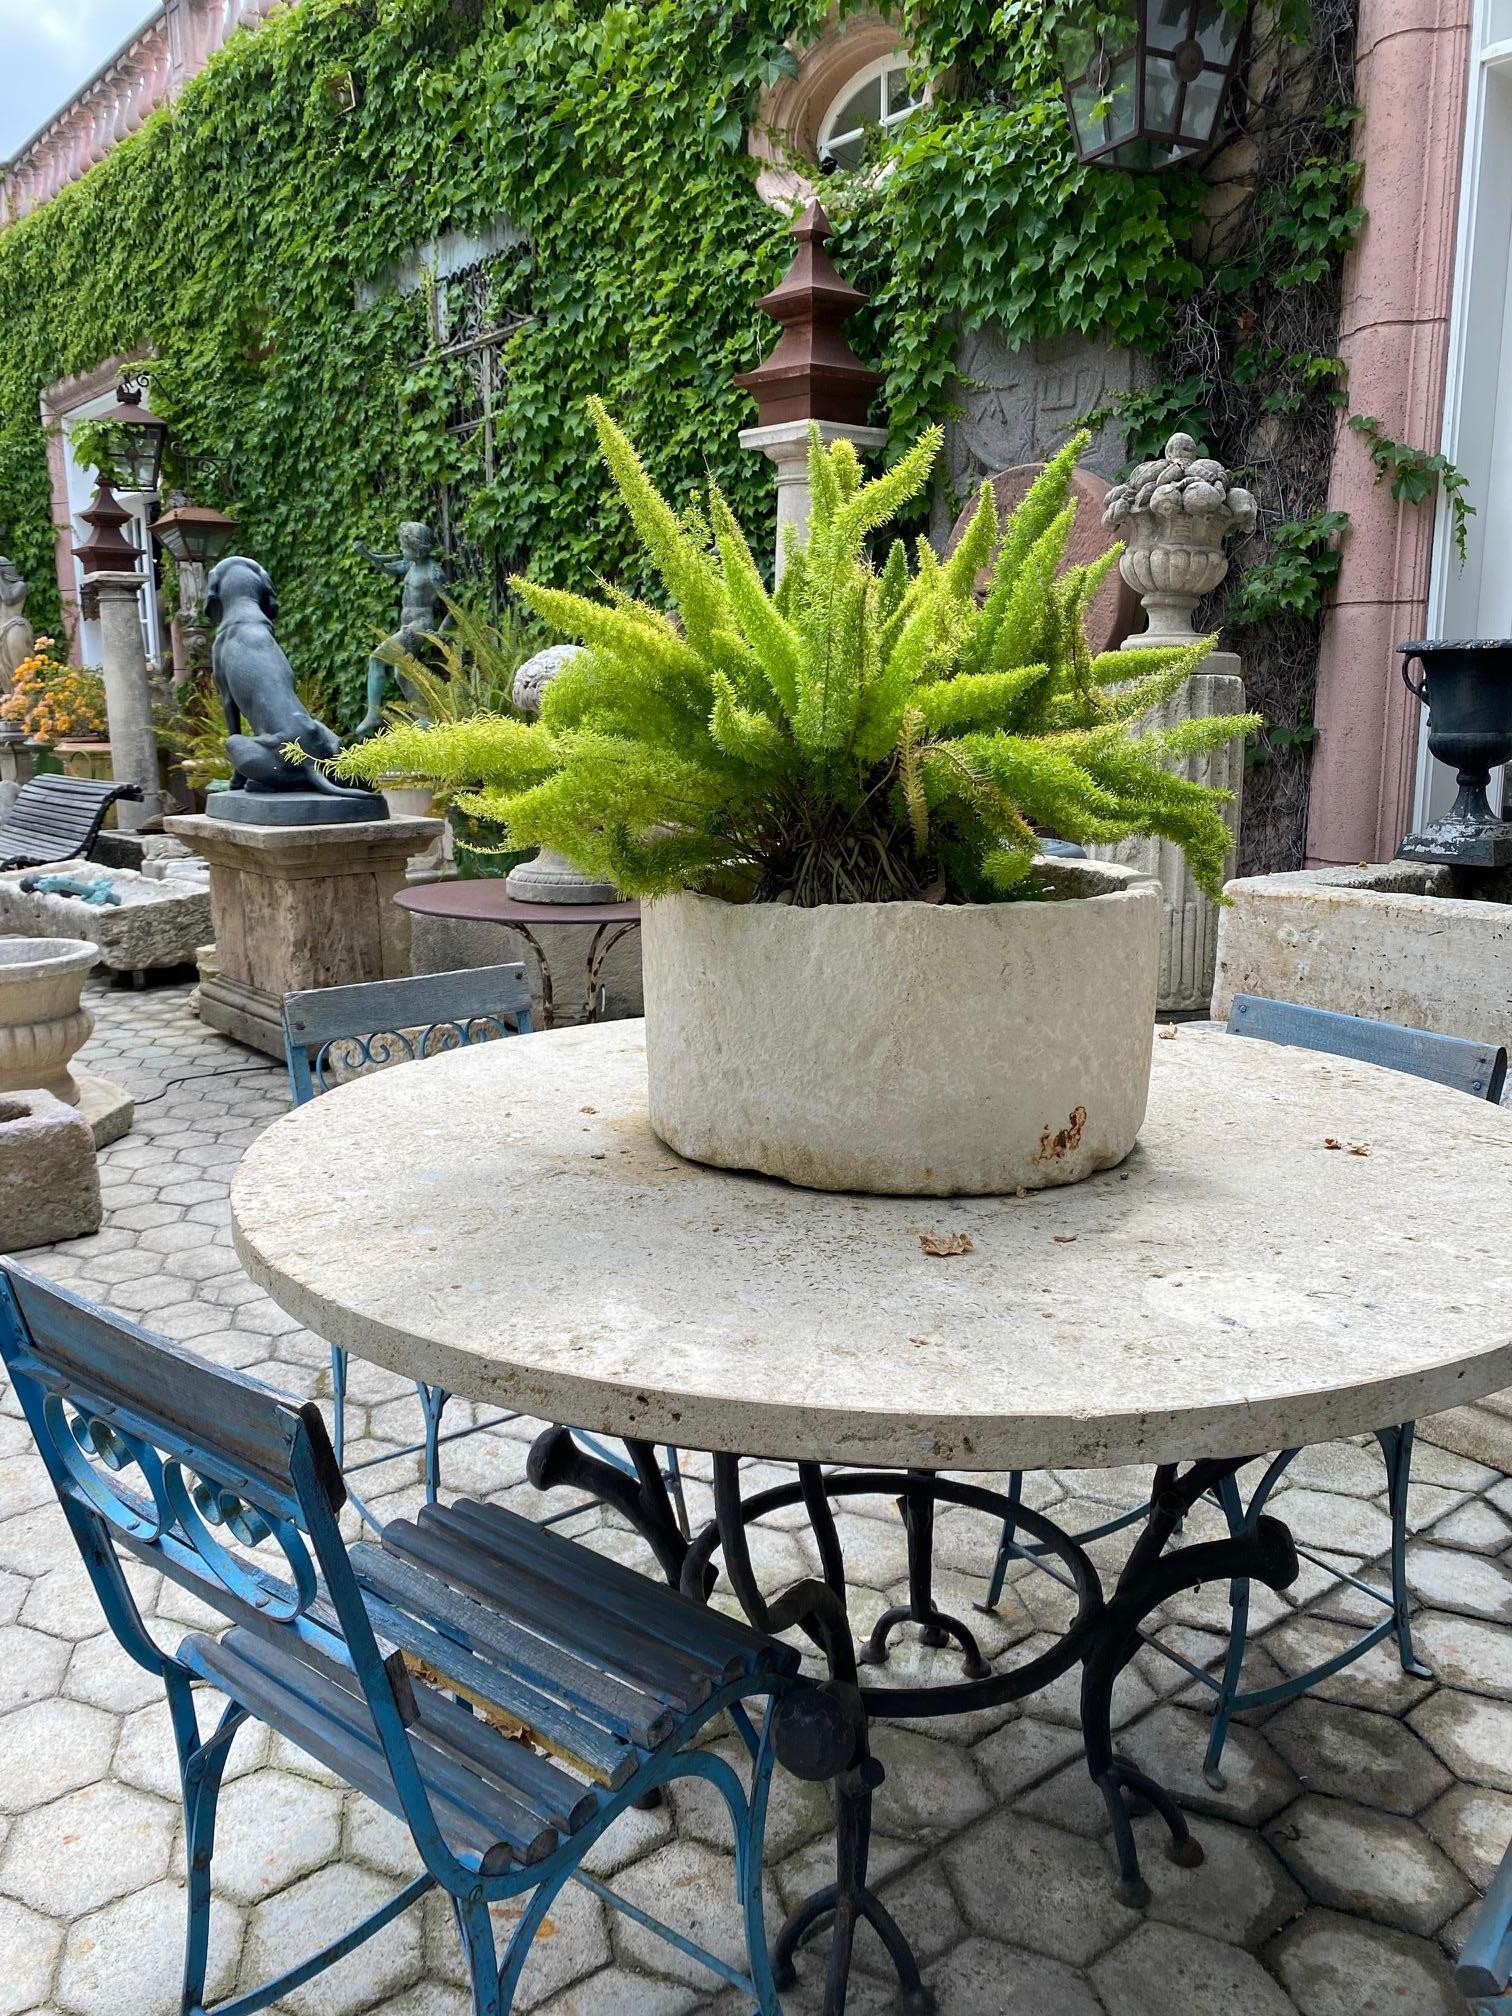 A Beautiful 18th-19th century hand carved stone container basin having a nicely textured surface and patina. It could be standing alone as a decorative object or used as a planter indoor outdoor. This Antique Stone vessel mortar planter has a lot of